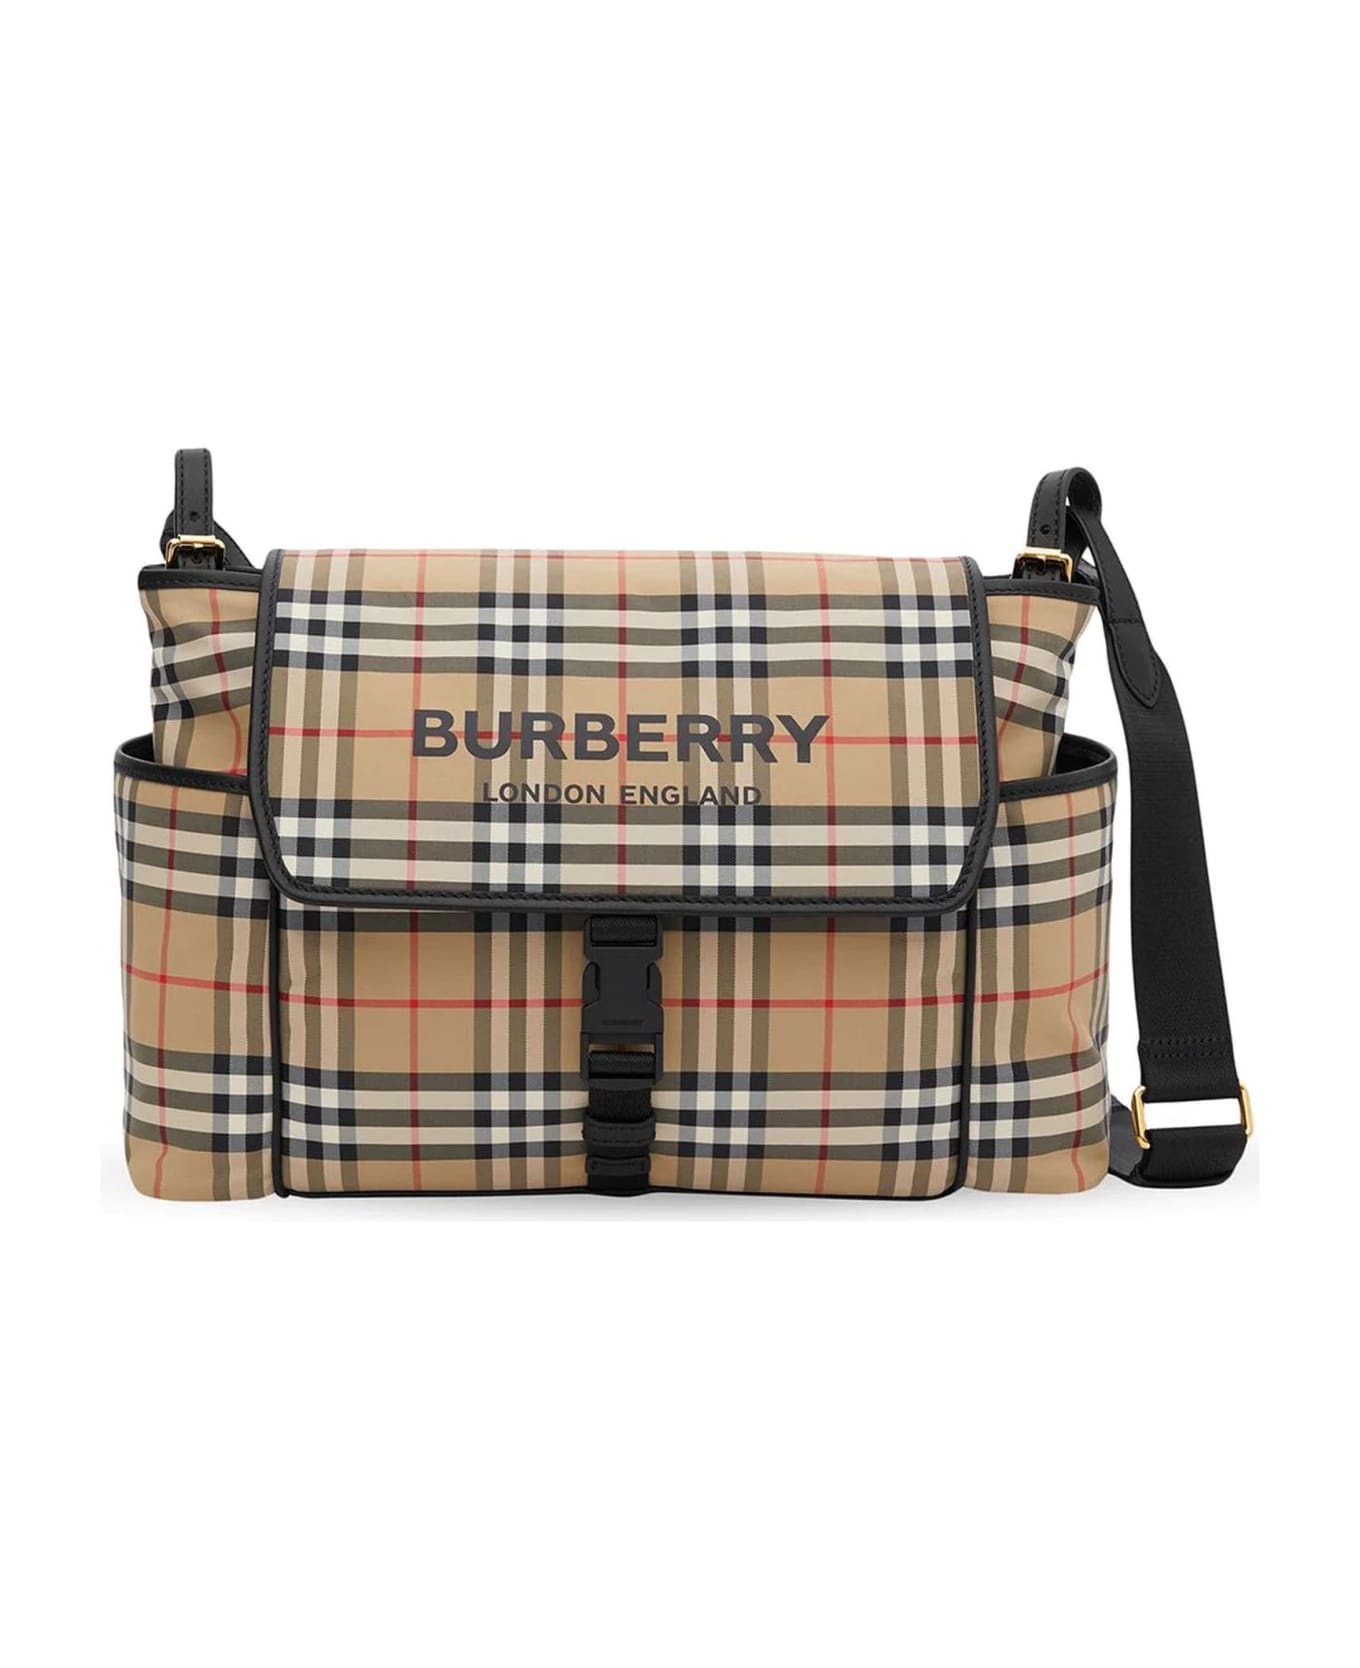 Burberry Brown Baby Changing Bag - Check